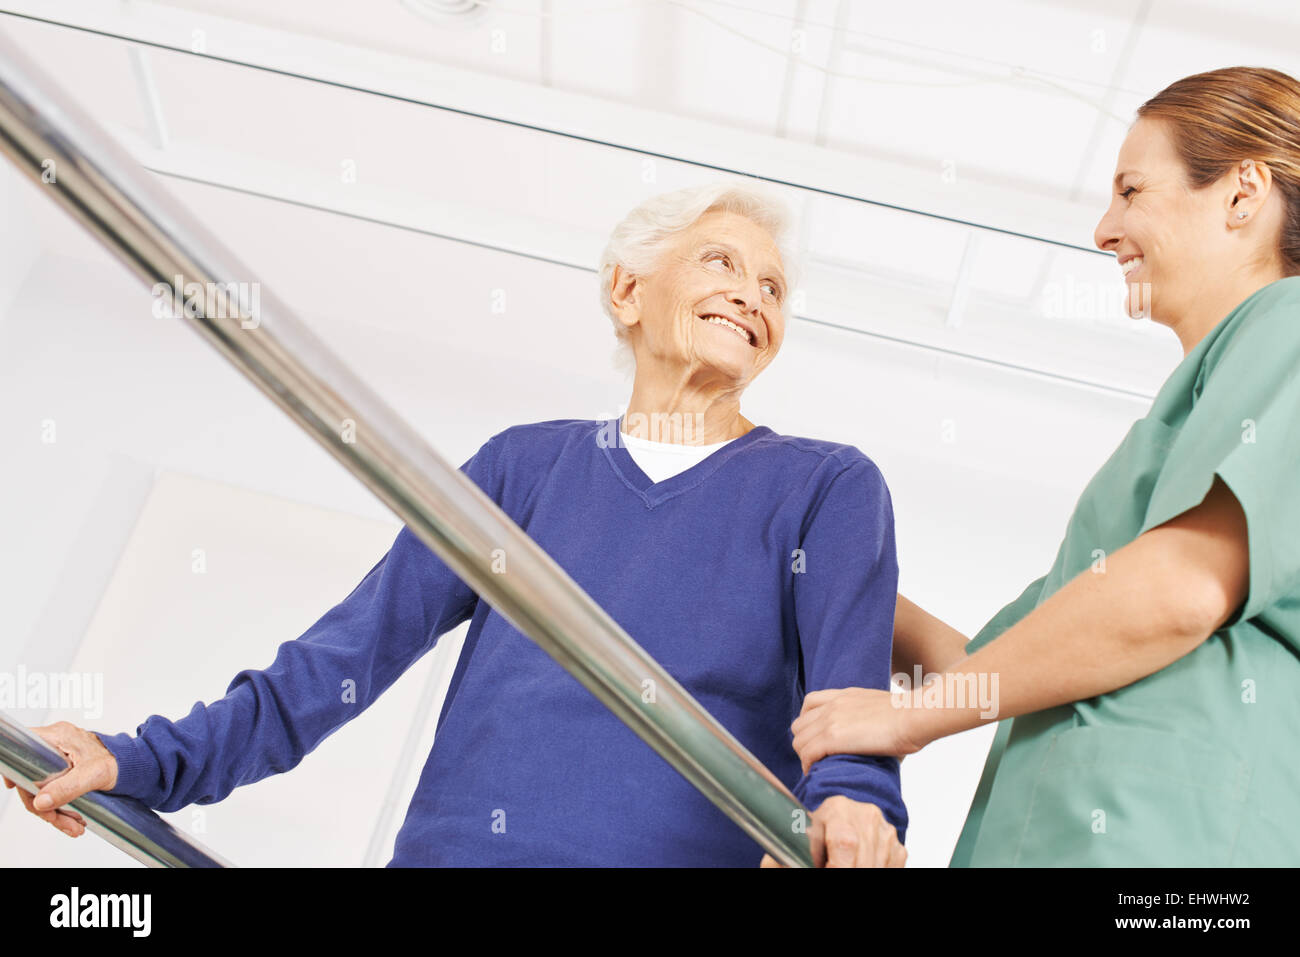 Smiling old woman in physiotherapy on a treadmill with physiotherapist Stock Photo